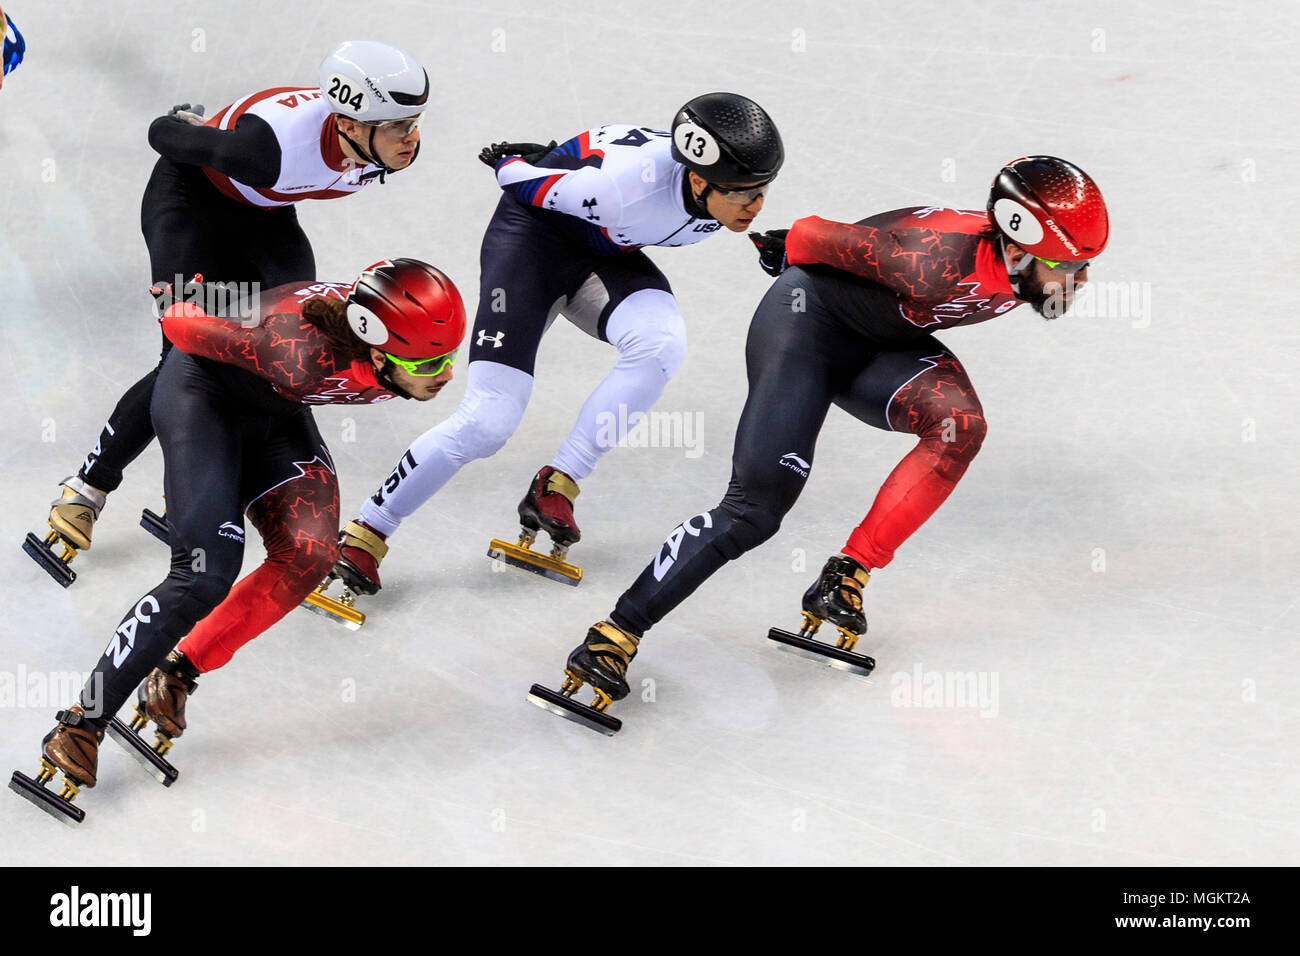 Charles Hamelin (CAN) #8, J.R. Celski (USA) #13, Samuel Girard (CAN) #3  and Roberto Pukitis (LAT) #204 competing in the Men's 1,500m short track spee Stock Photo